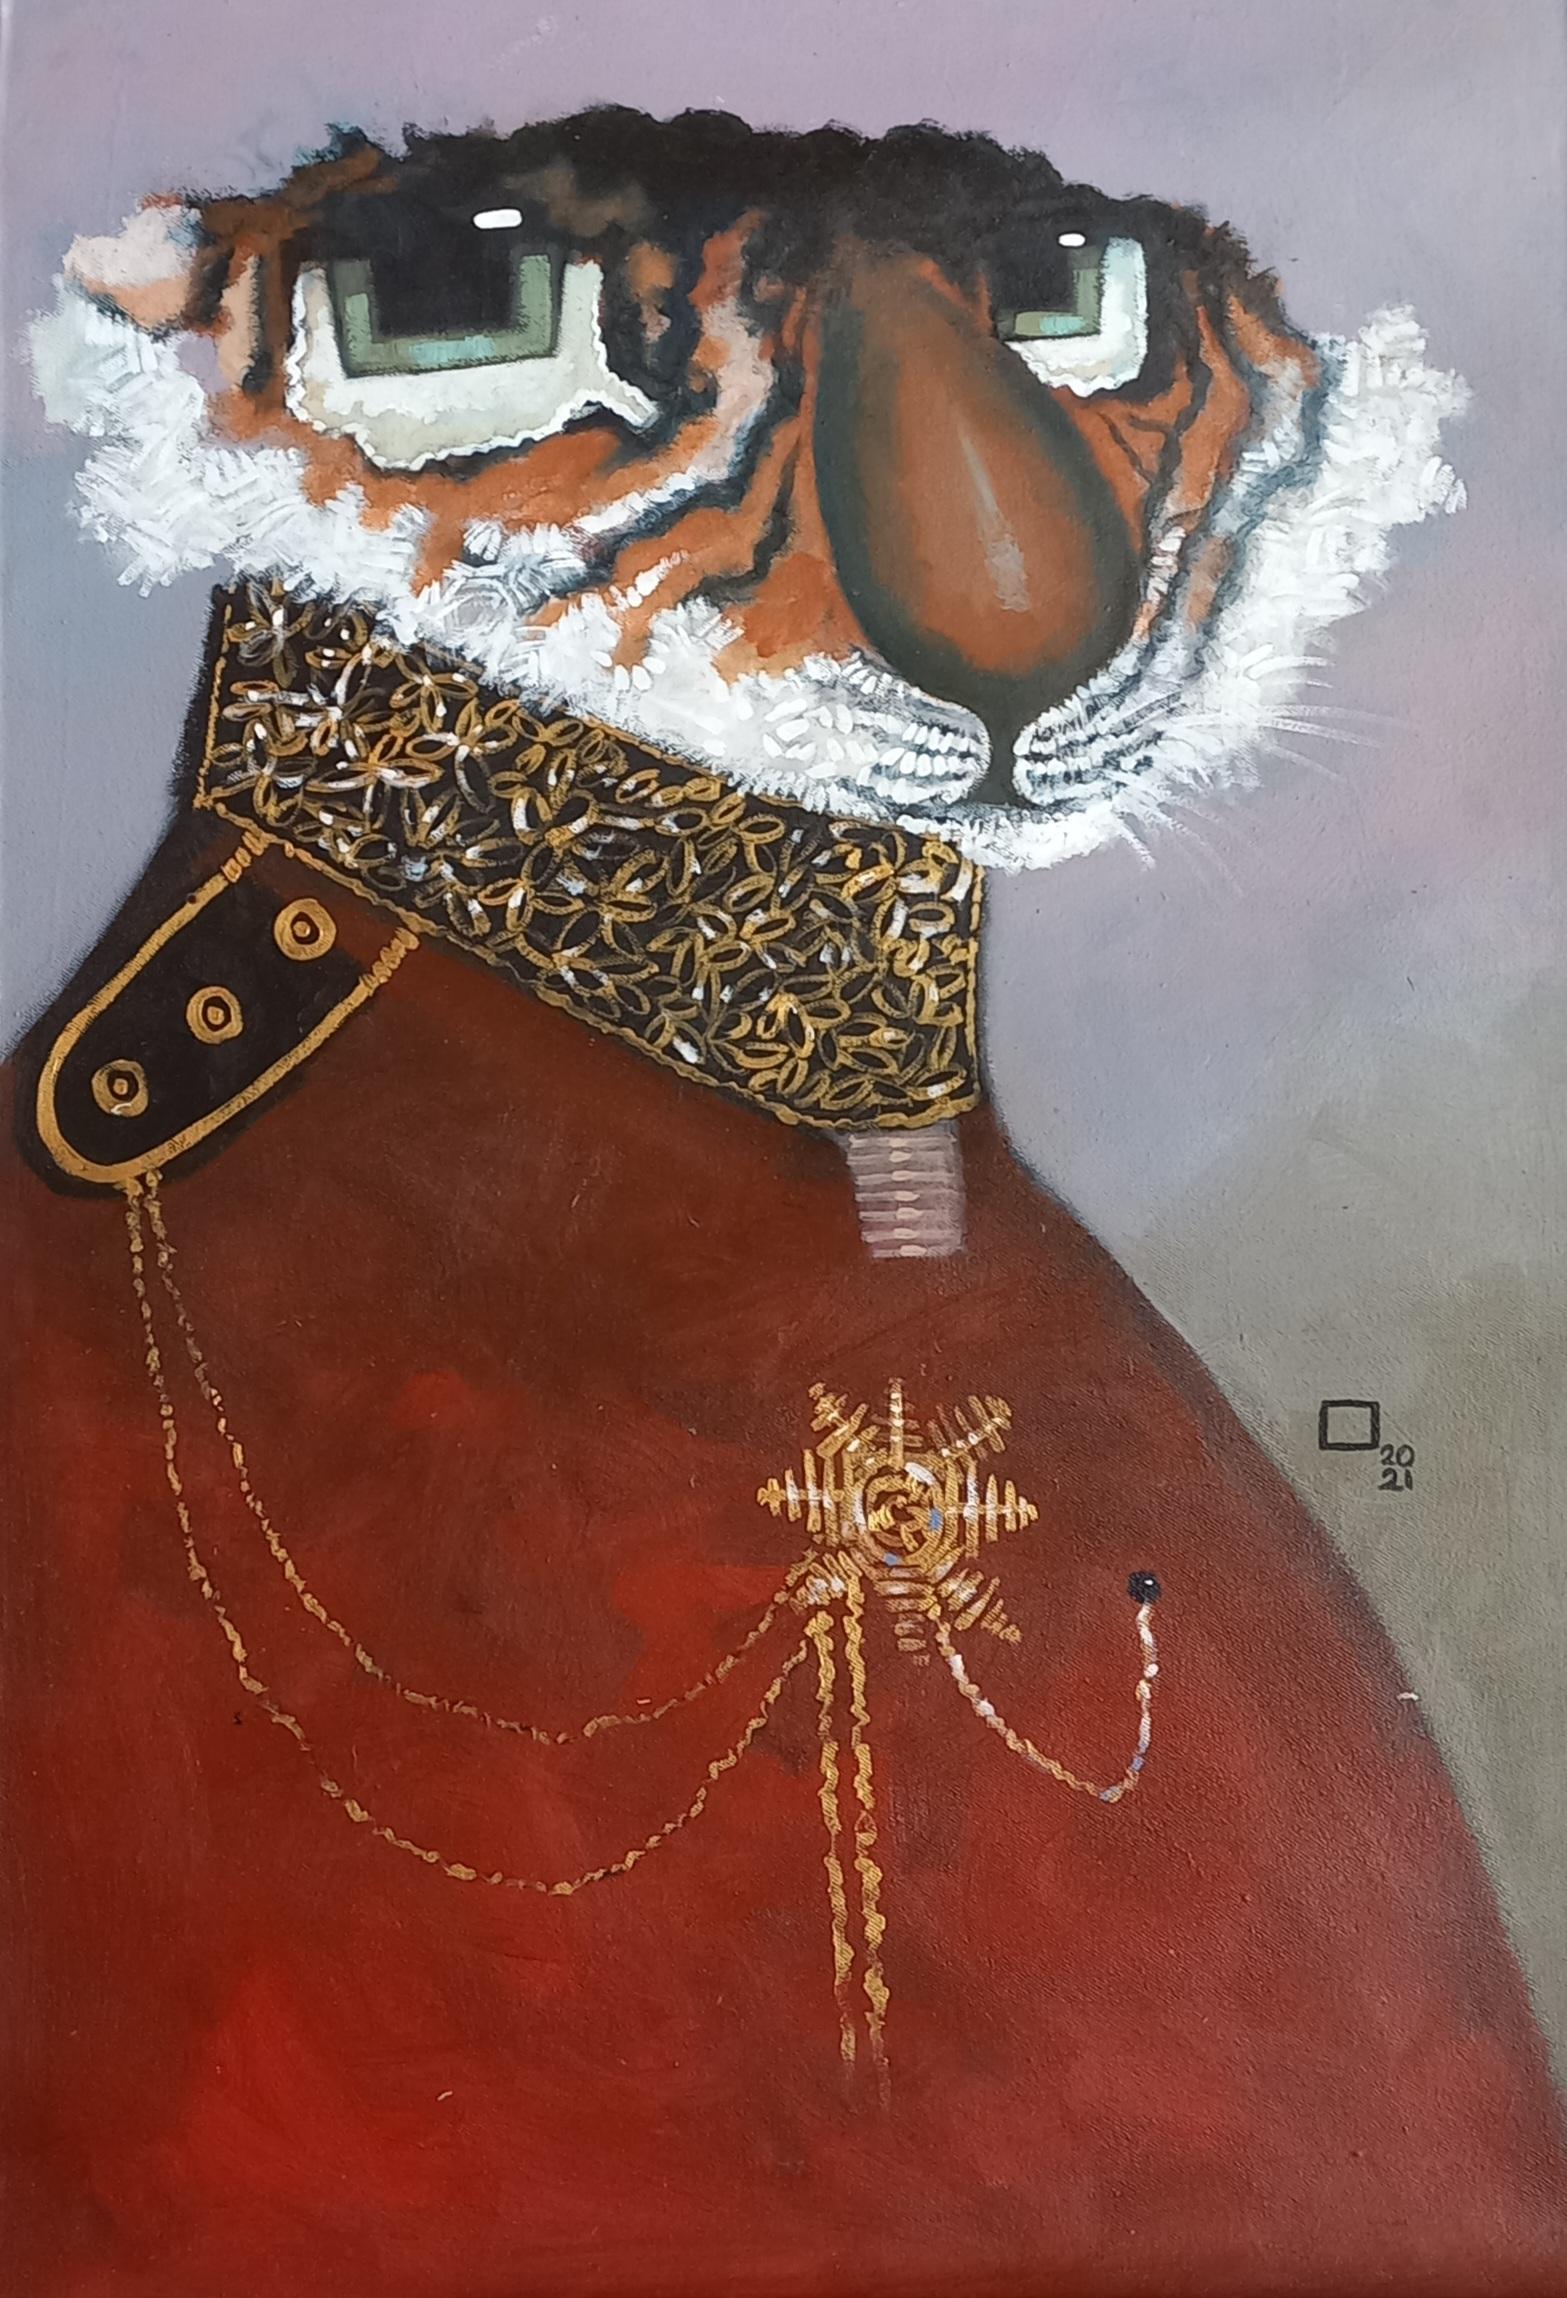 Prince Obasi Figurative Painting - Untitled (Royal Officer 2)